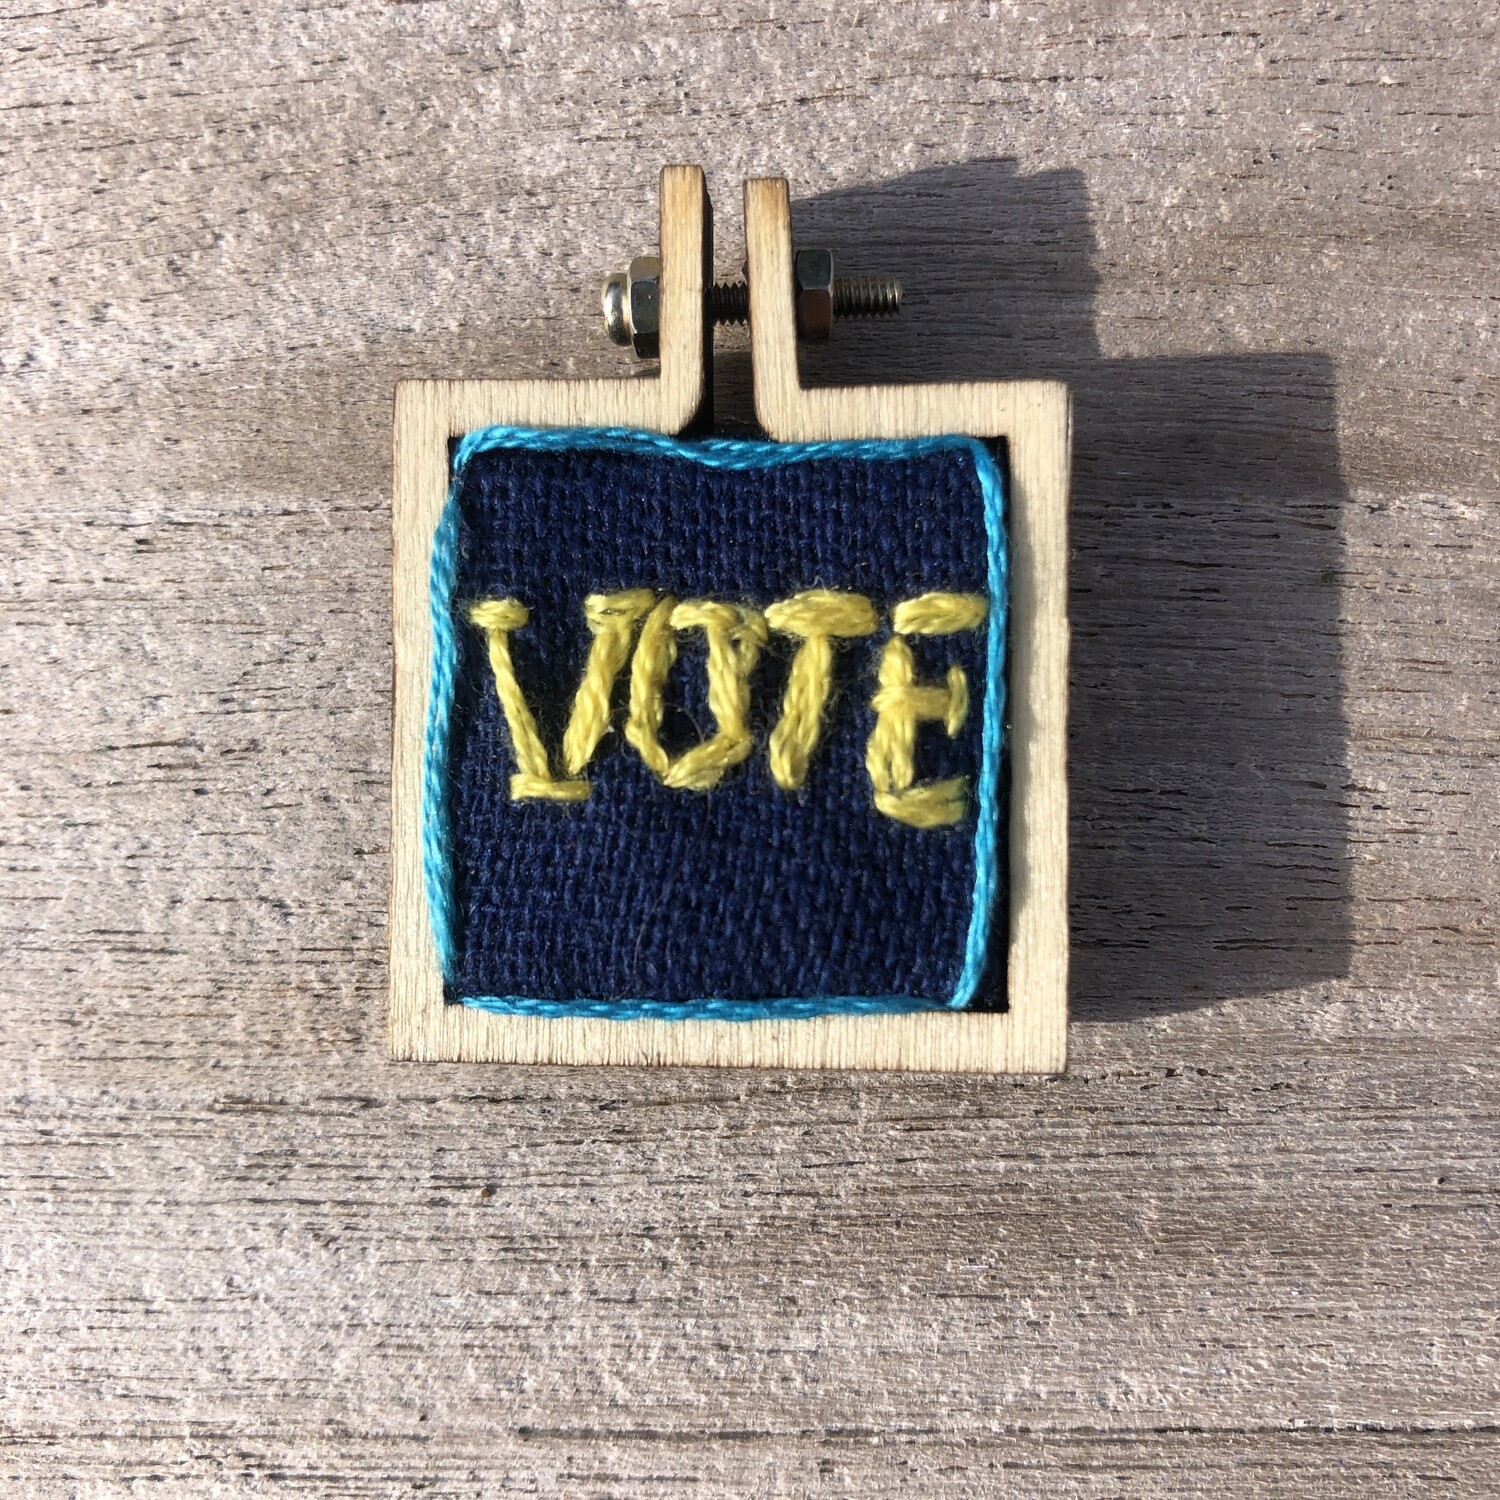 VOTE Squared - Embroidered Pendant or Magnet